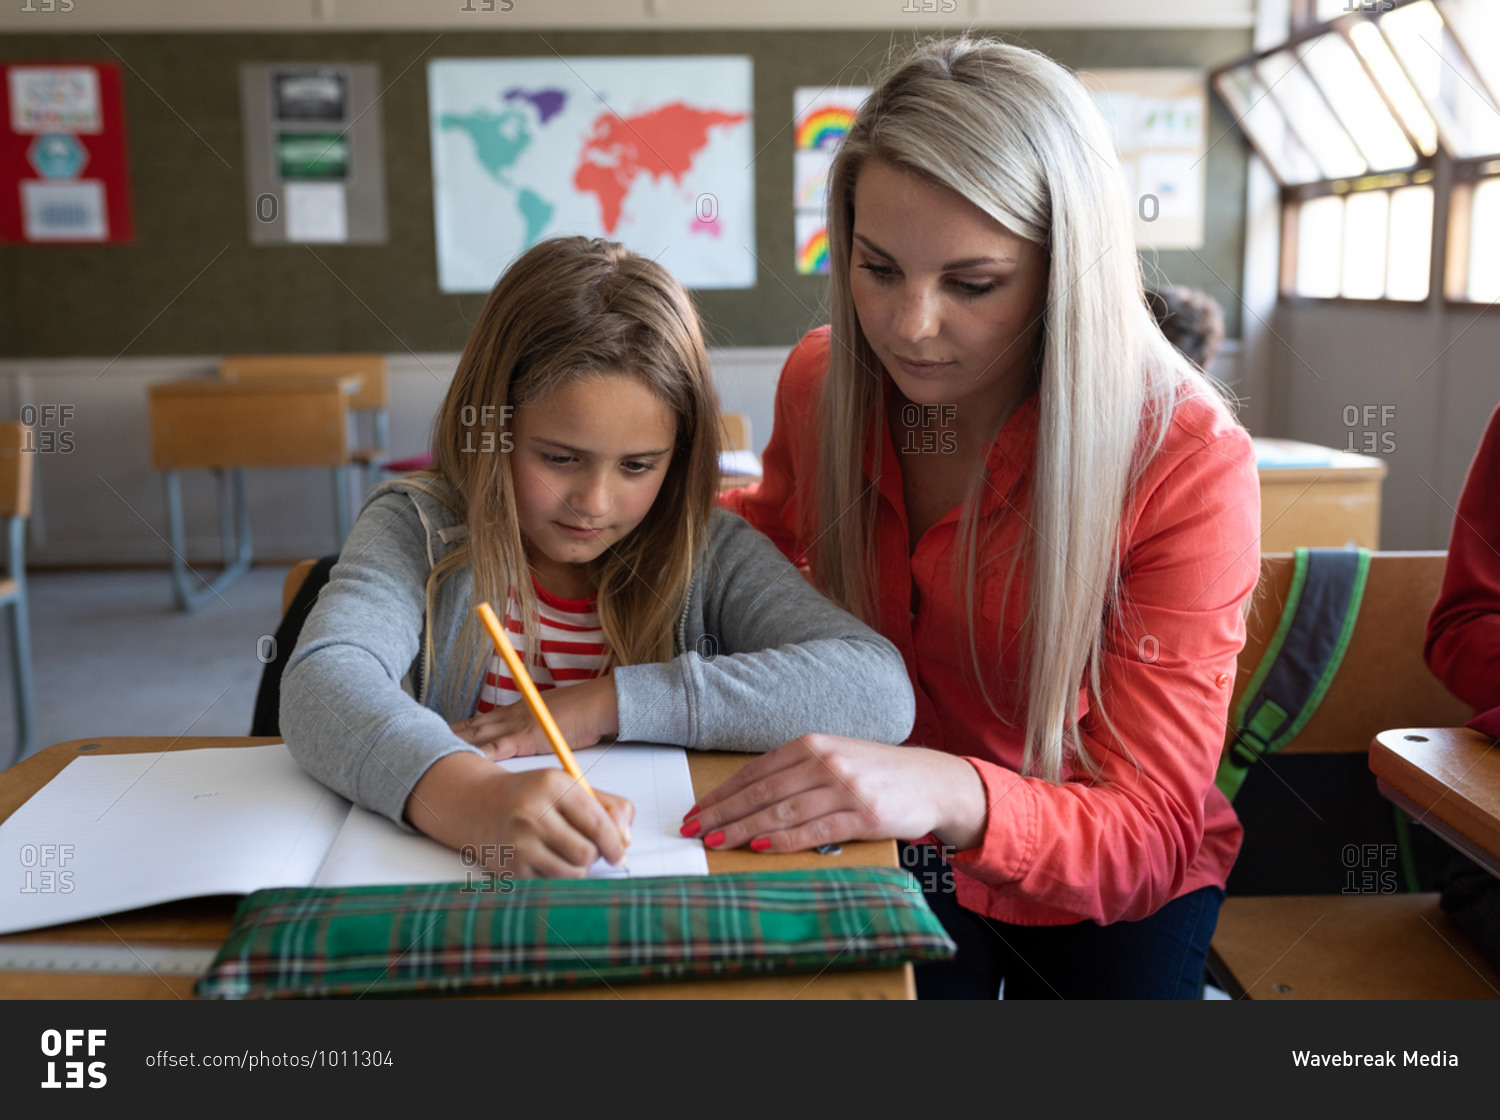 Female Caucasian teacher teaching a Caucasian girl during the lesson. Primary education social distancing health safety during Covid19 Coronavirus pandemic.